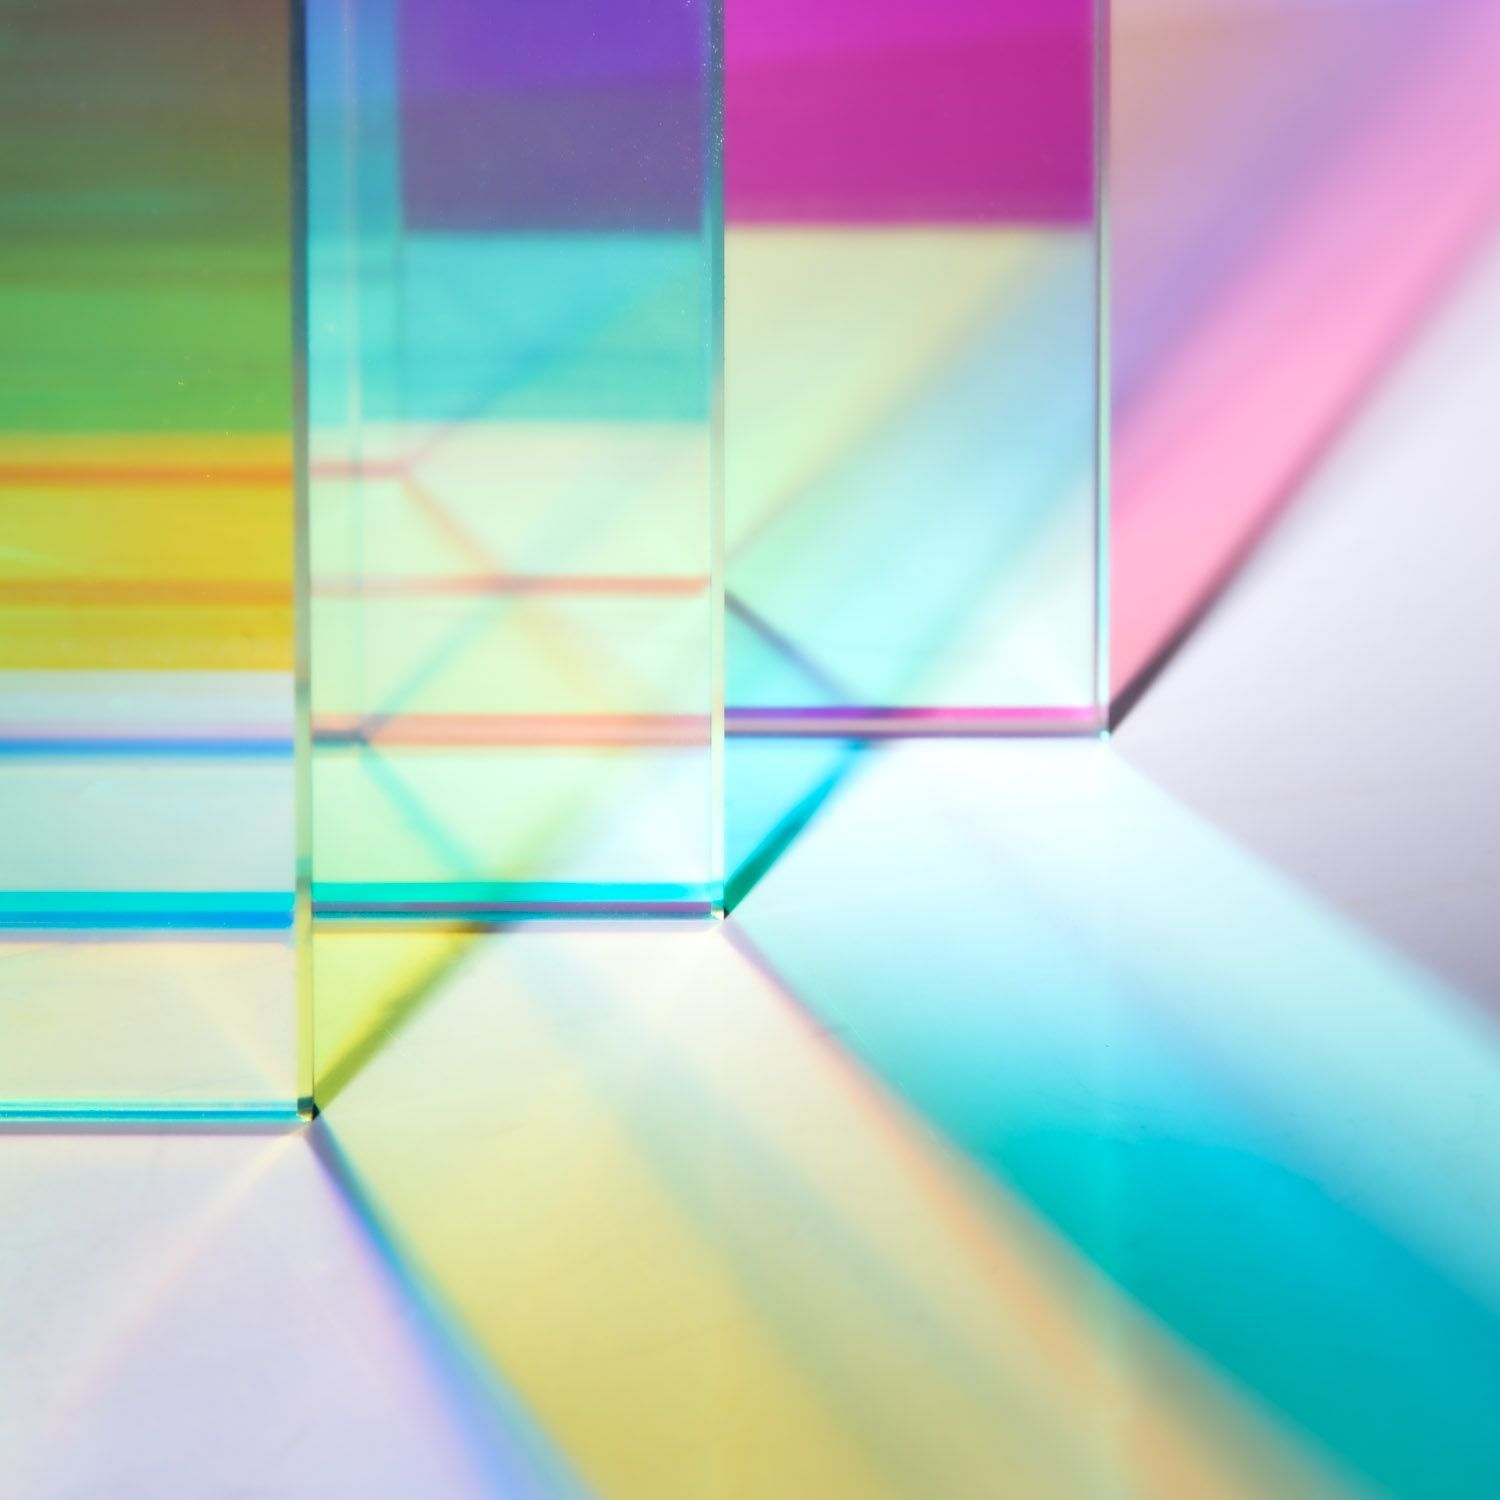 Several sheets of dichroic glass reflecting an array of colors from yellow to rose to teal.